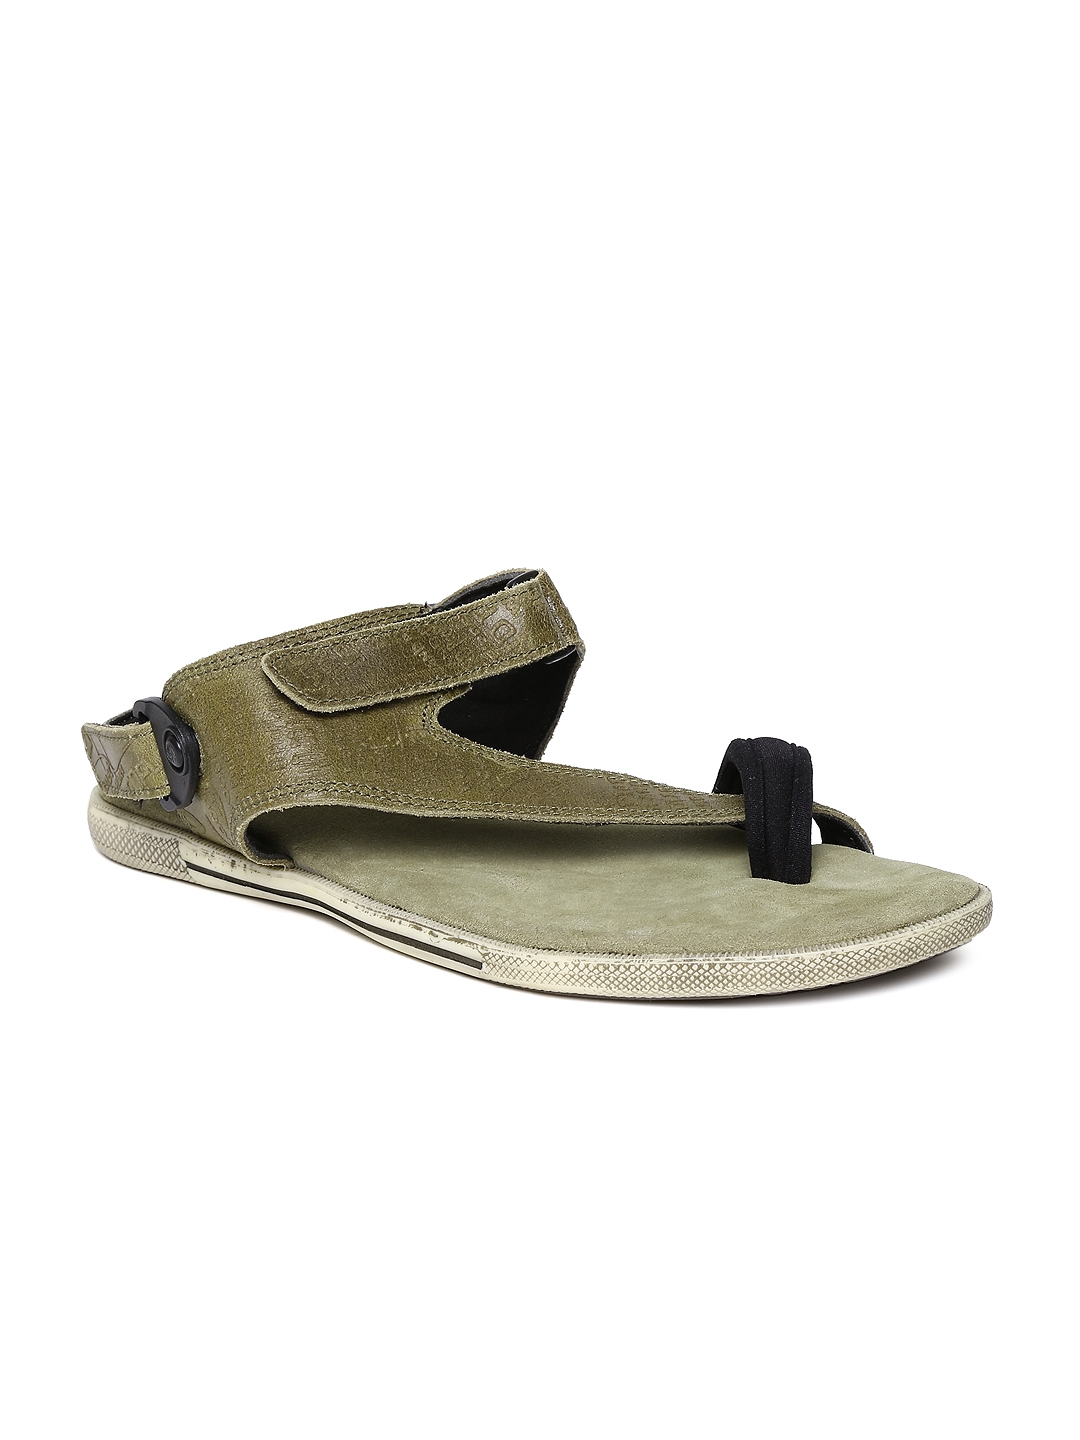 Woodland OLIVE GREEN Casual Sandal